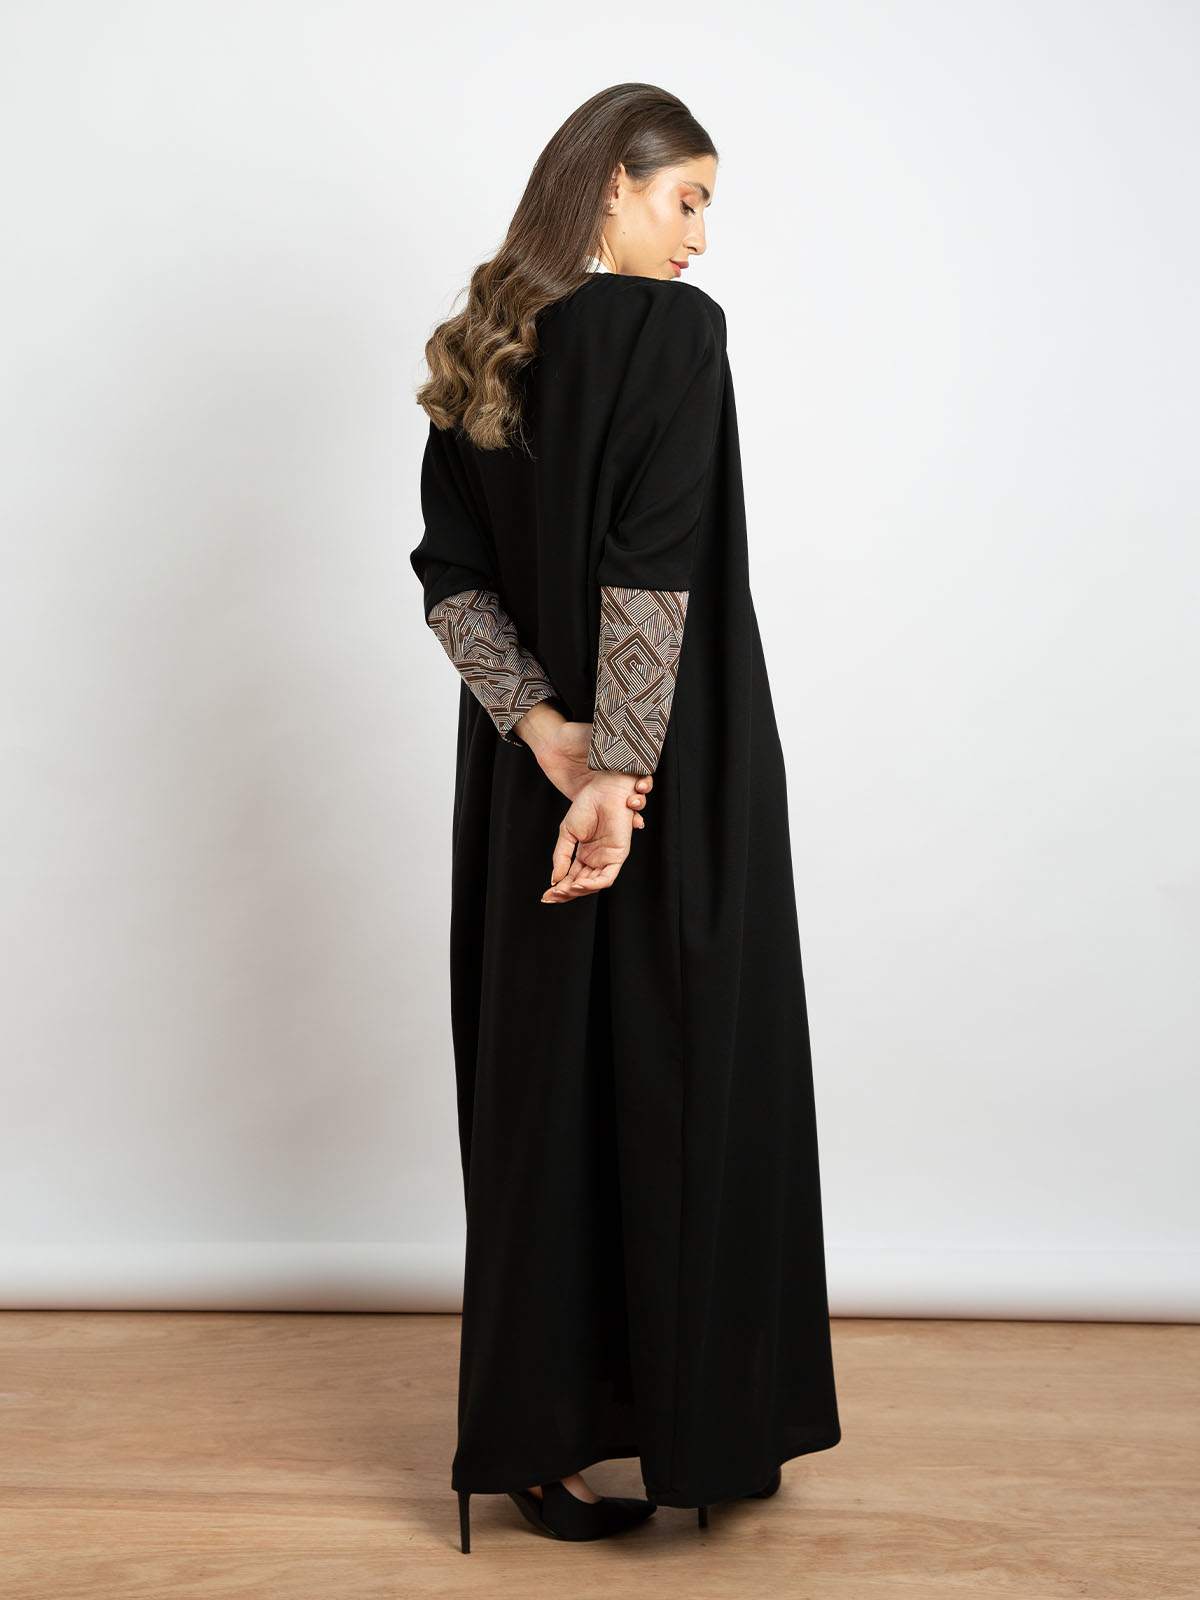 Black with Brown - Half Bisht Long Open Abaya with Geometric Art Piece on the Sleeves